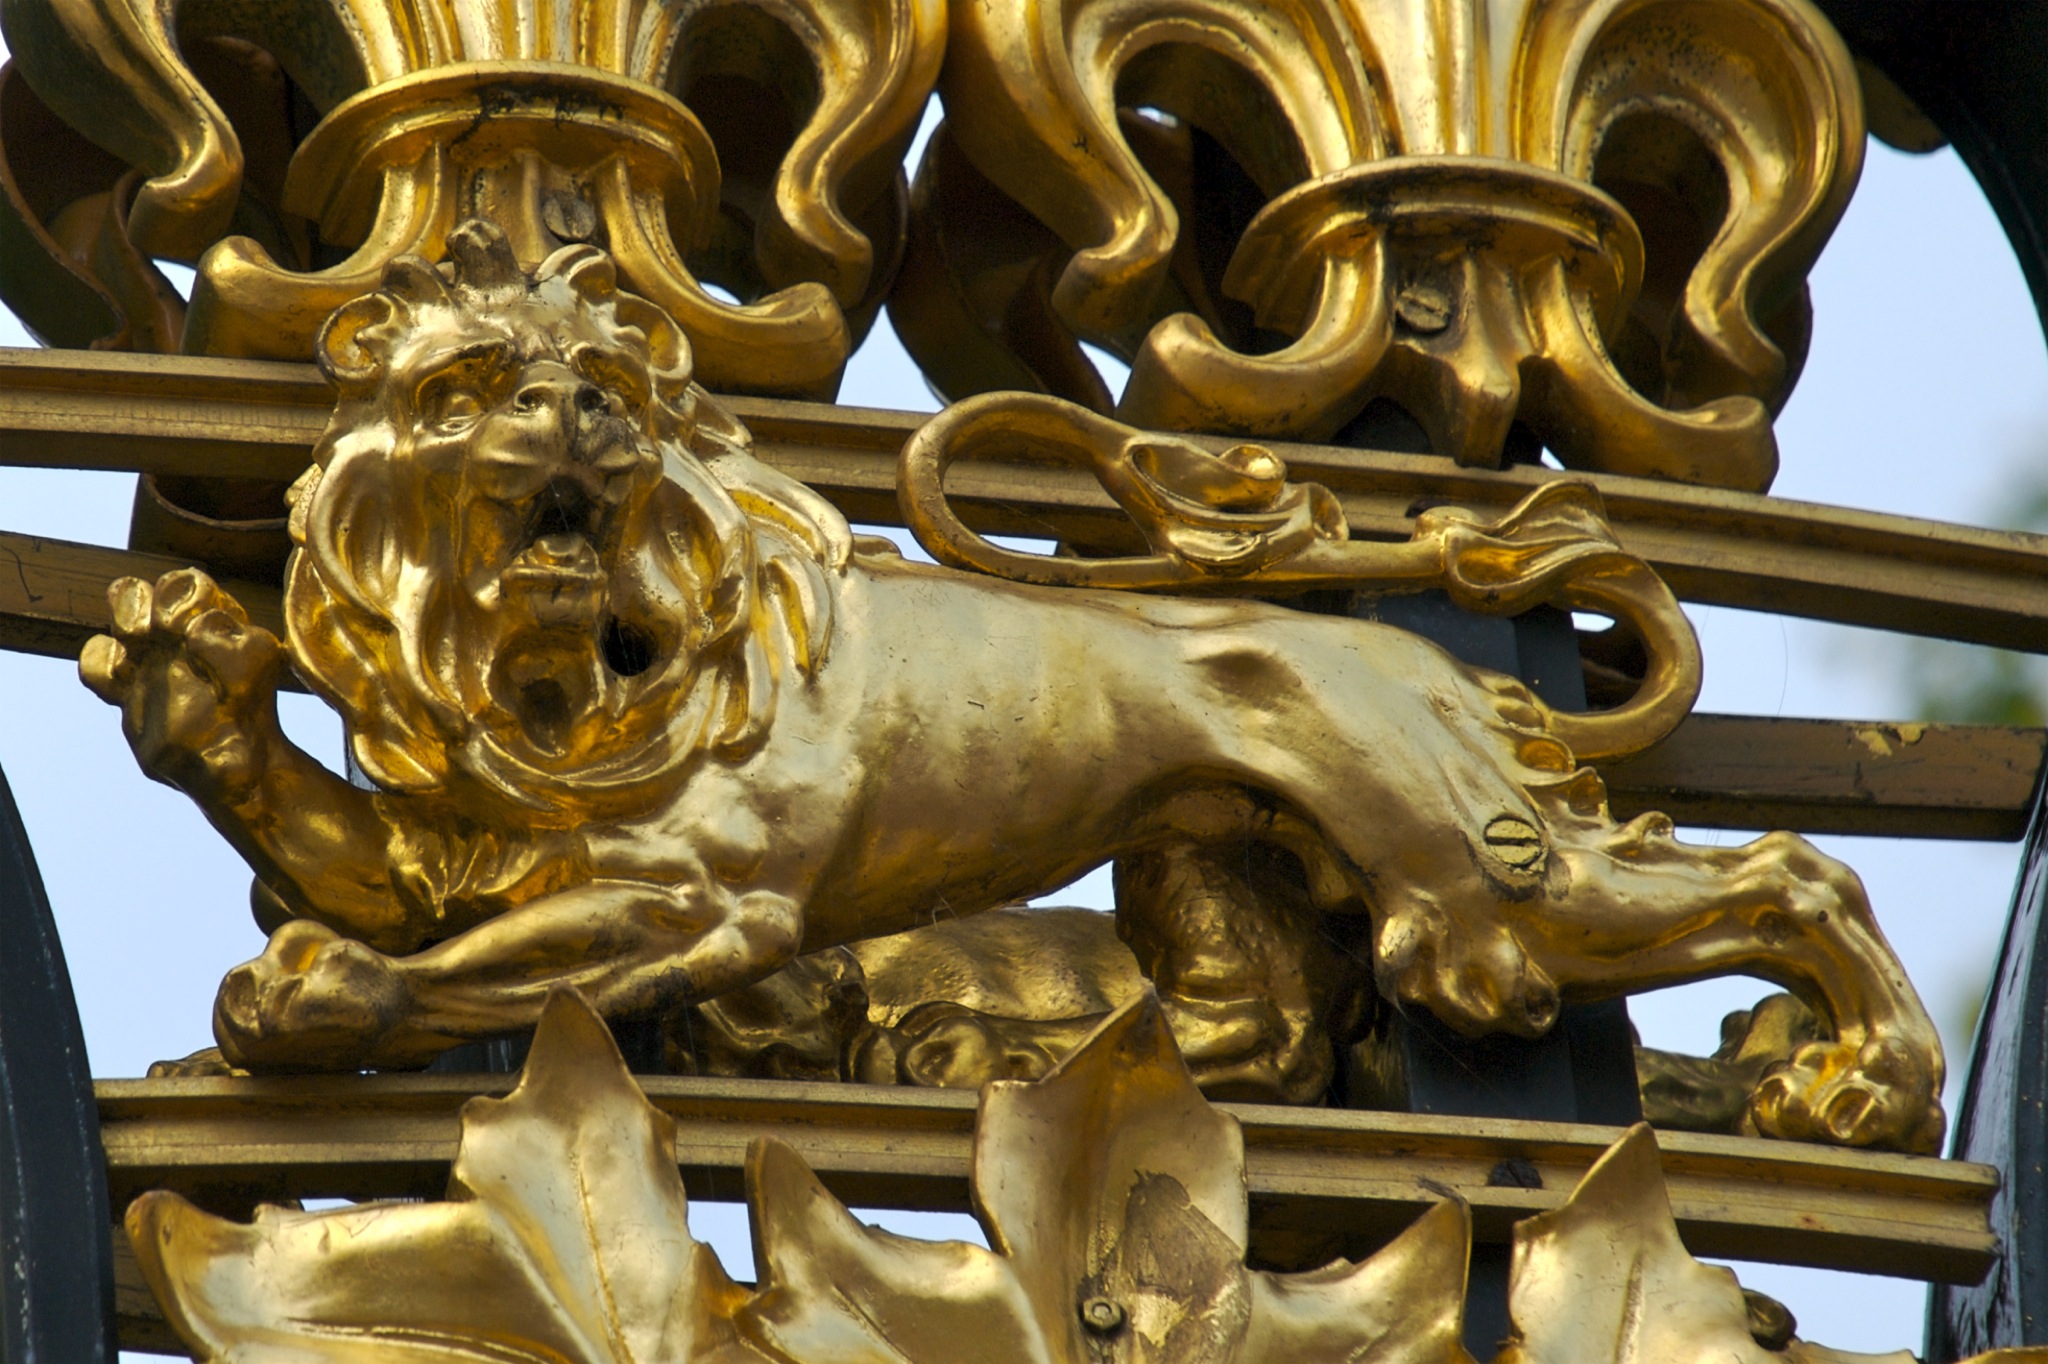 the golden lion statue is mounted on the wall